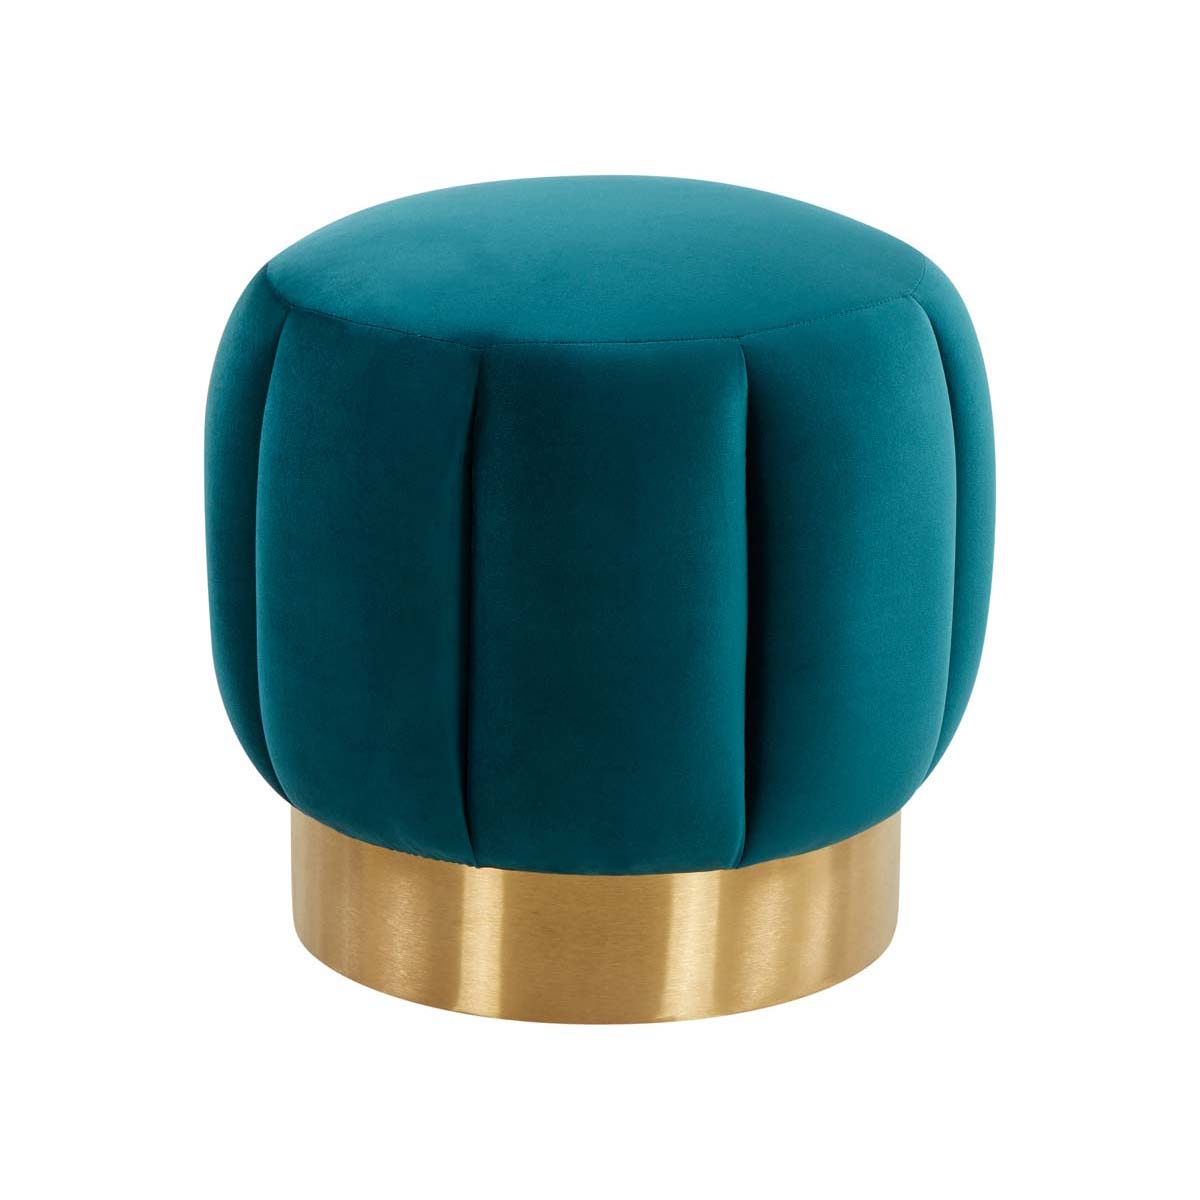 Safavieh Couture Maxine Channel Tufted Otttoman - Petrol